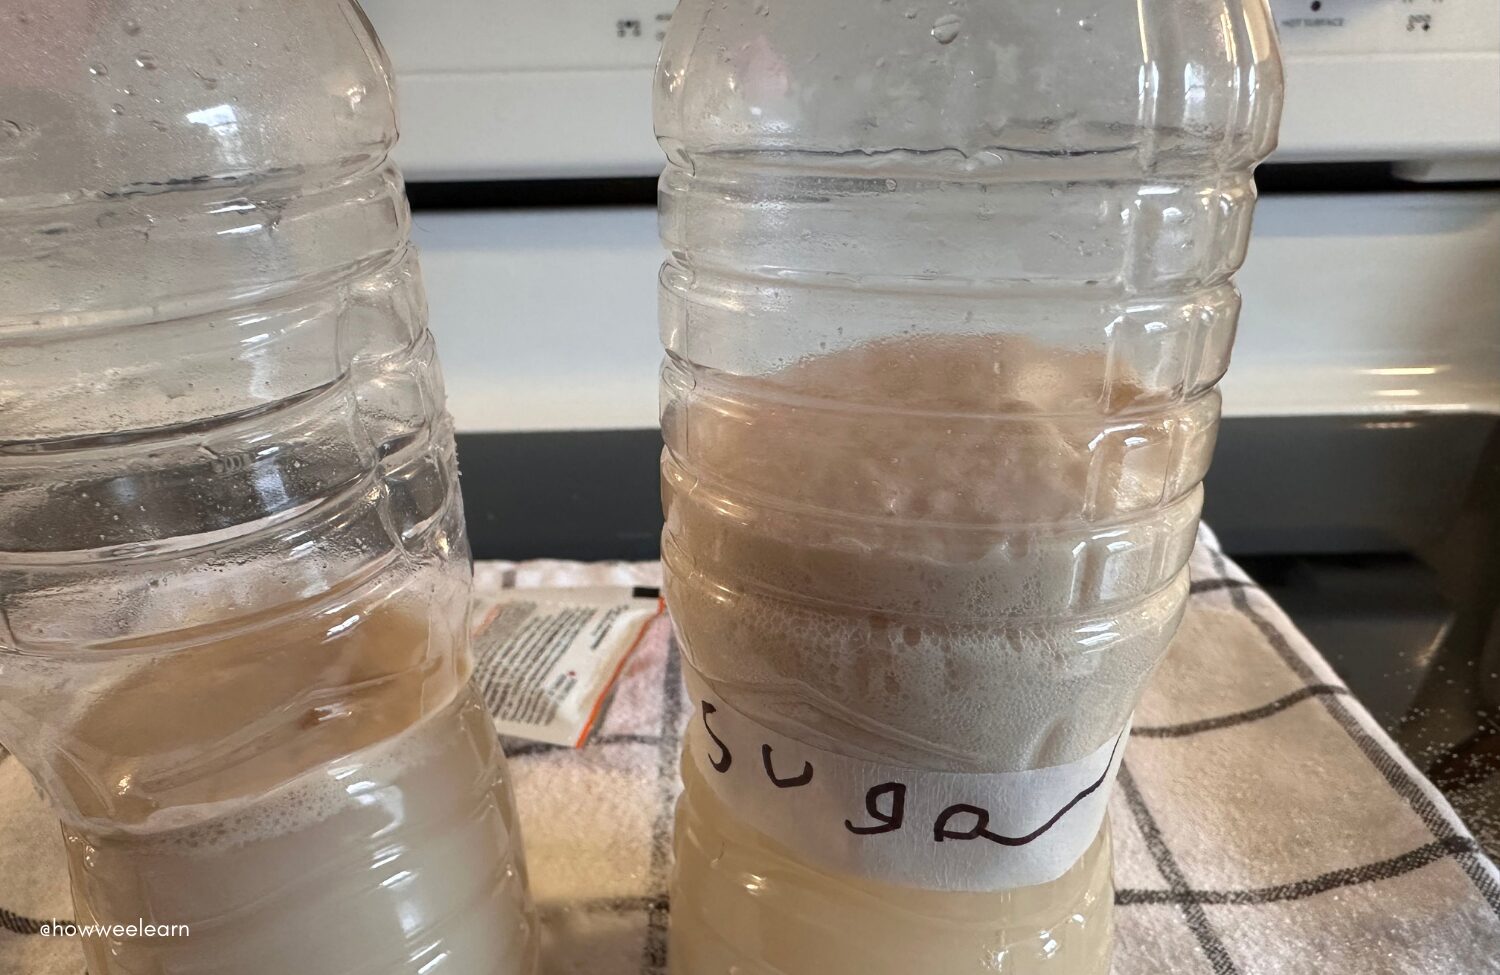 Yeast starting to bubble and release carbon dioxide